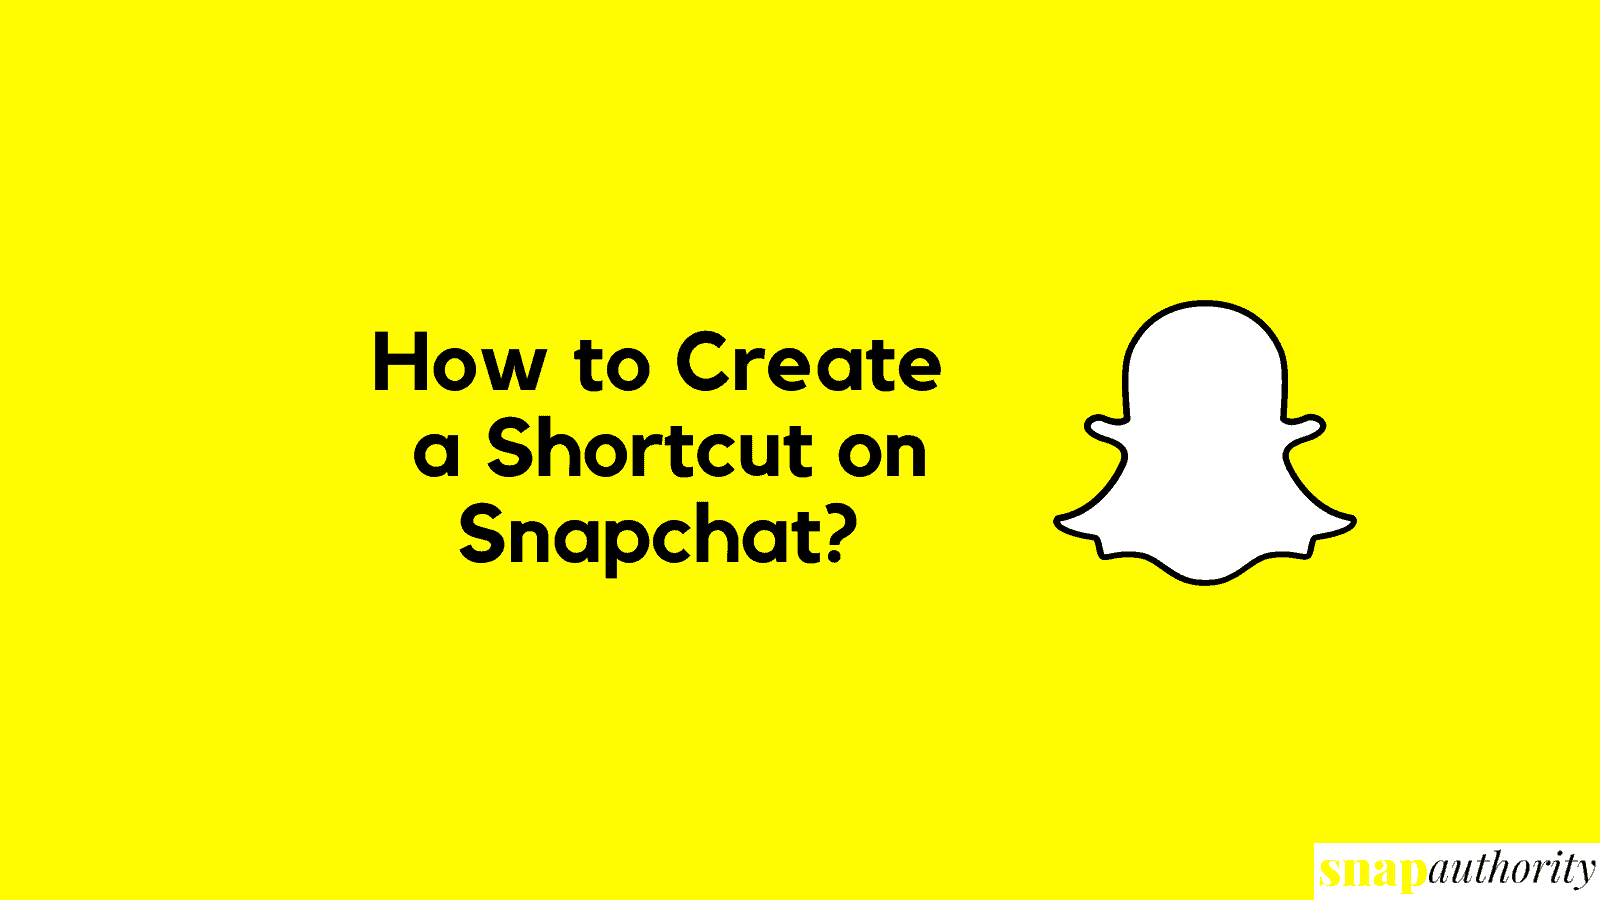 How to Create a Shortcut on Snapchat? - Snap Authority